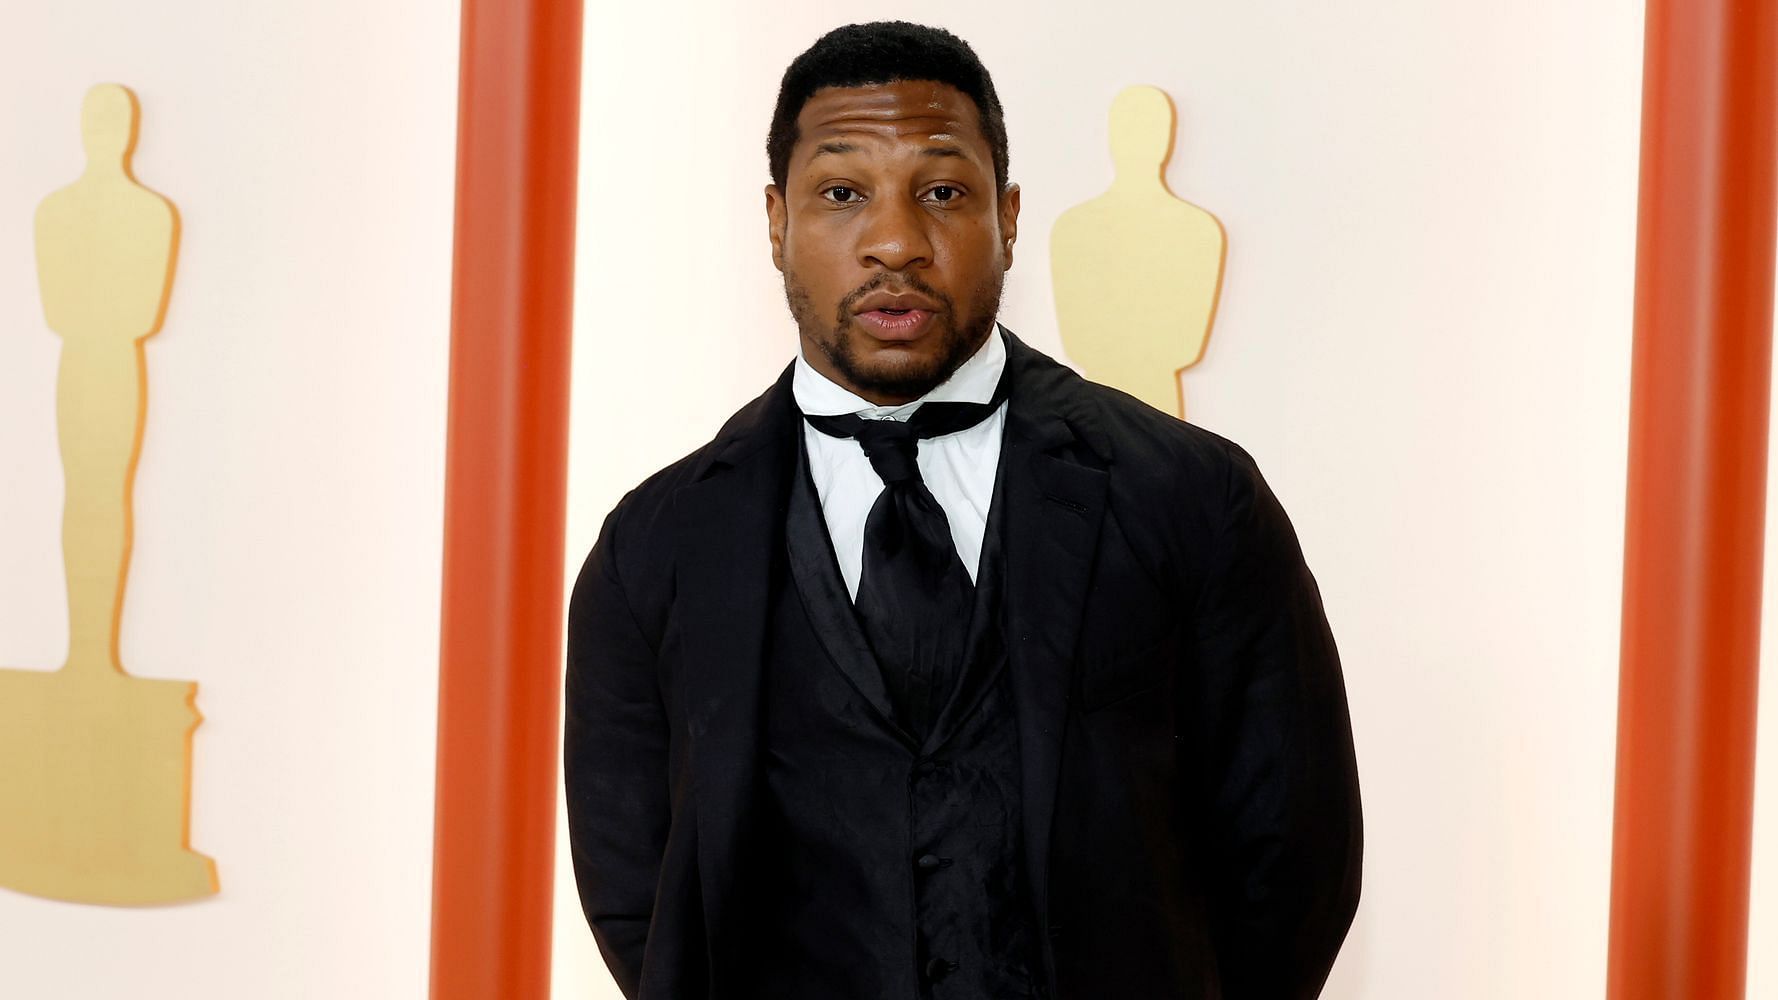 Jonathan Majors: From rising star to allegations - A look into the uncertain future of a Hollywood talent (Image via Getty)